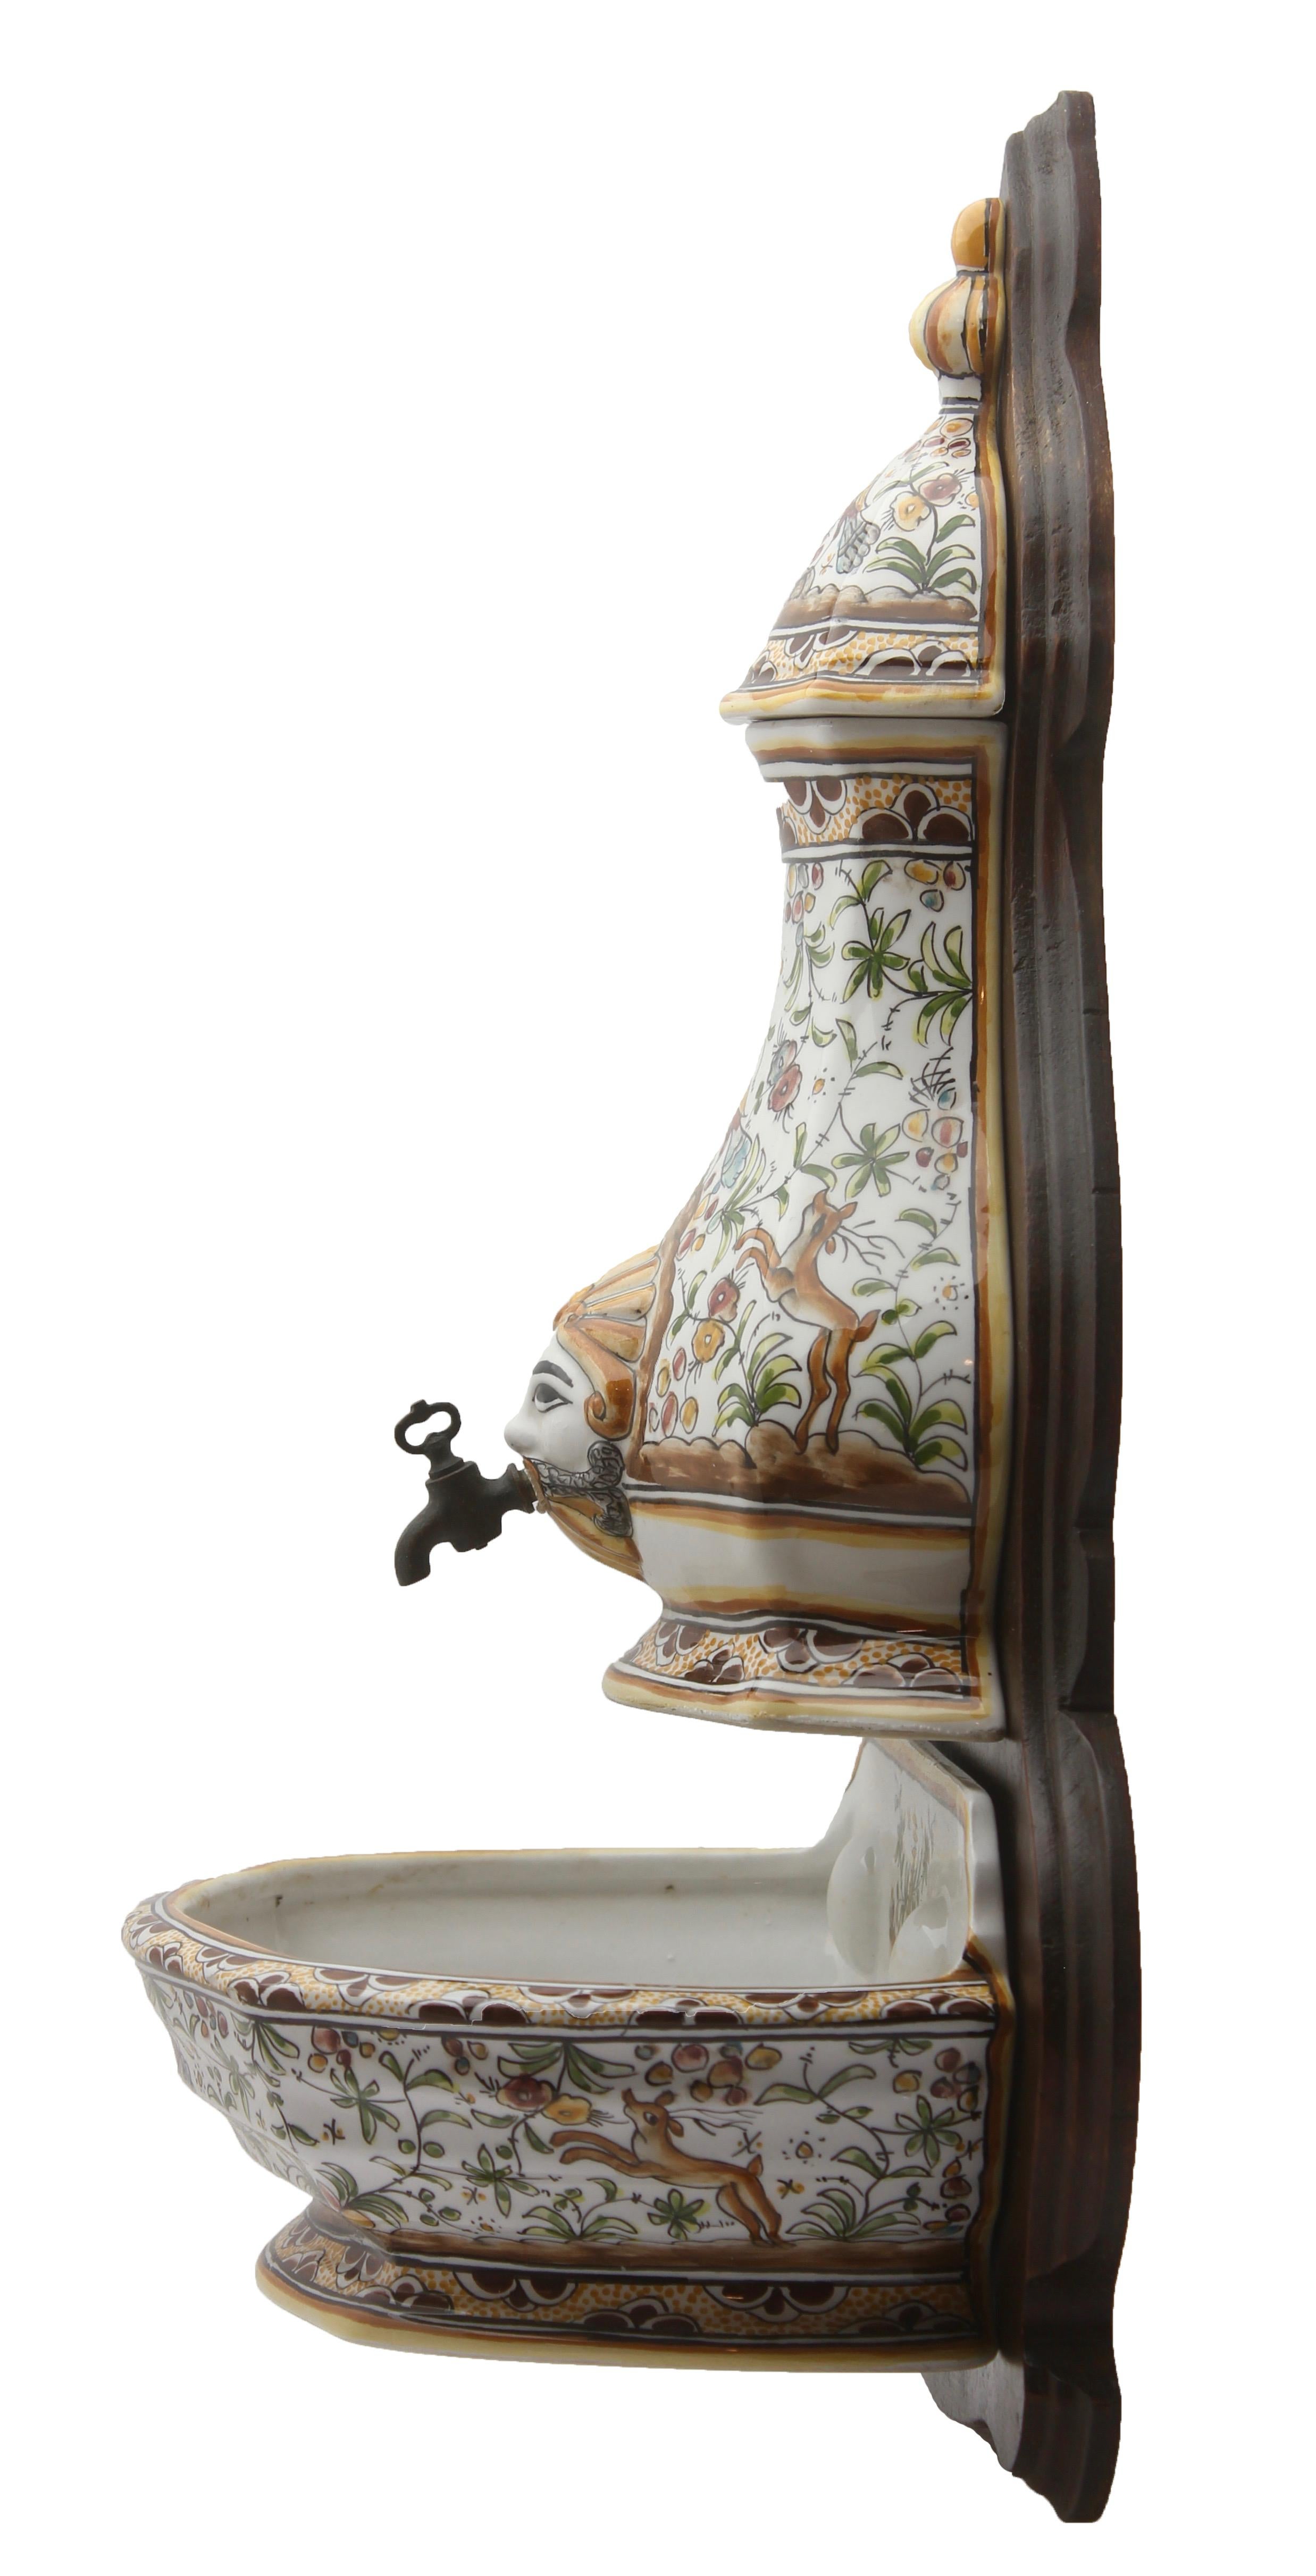 Colorful Portuguese Cistern/Humidifier with 17th Century Flowers & Masque Decor For Sale 1